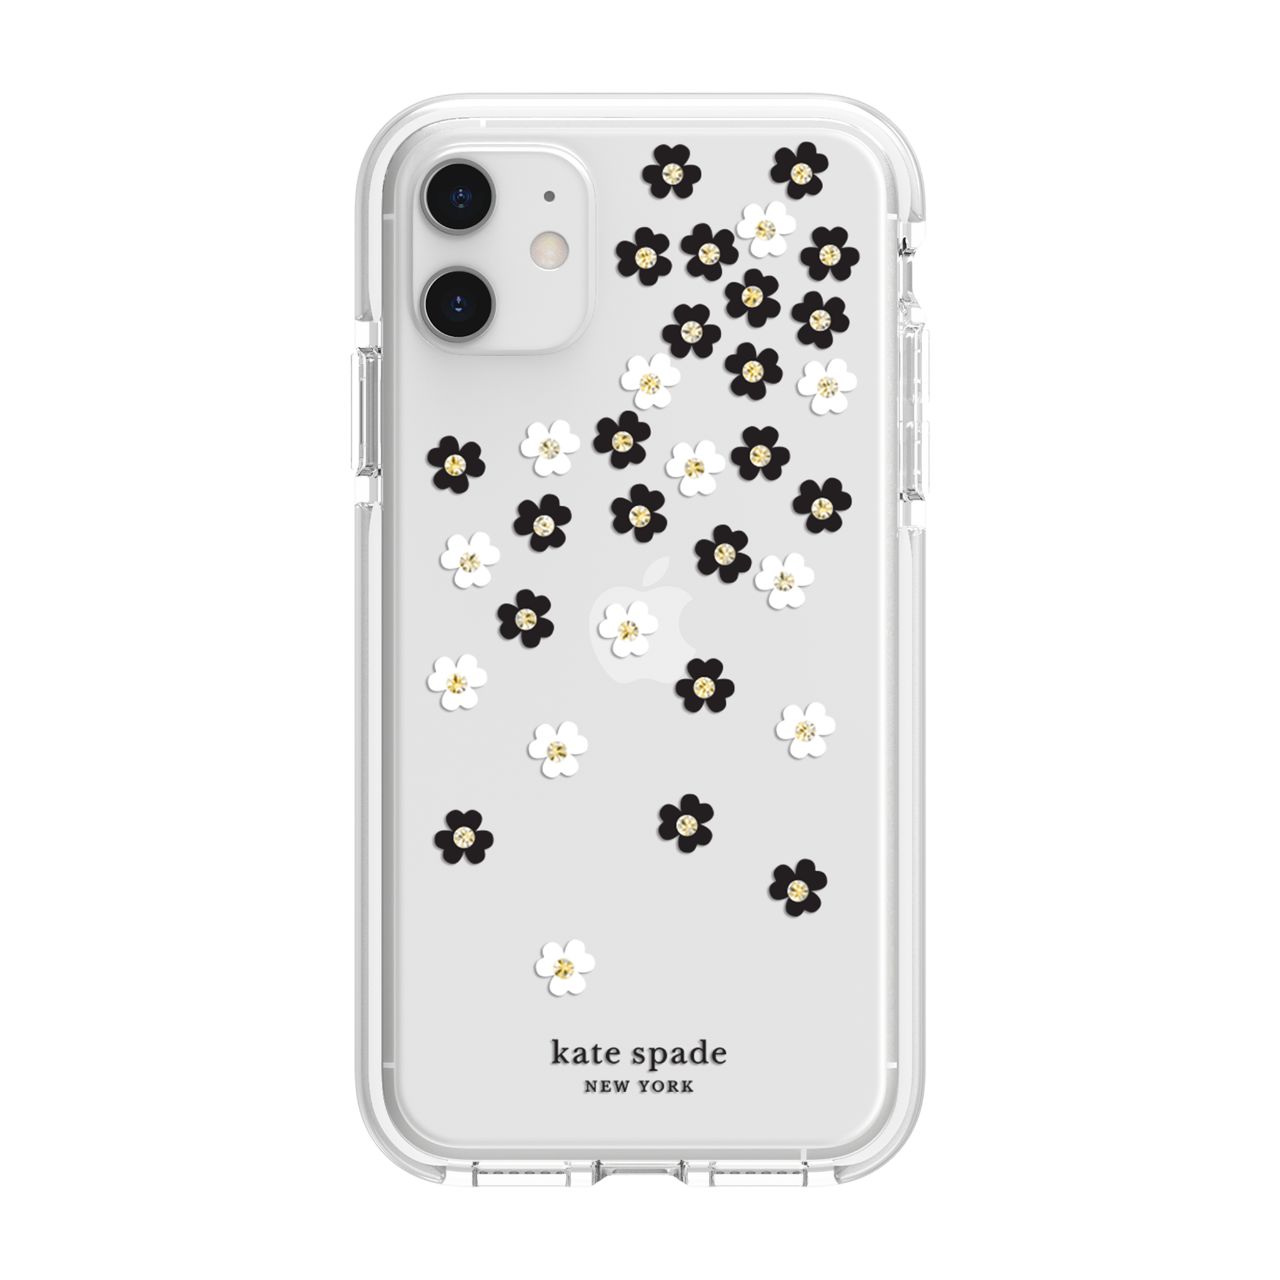 Kate Spade Defensive Hardshell Case Scattered Flowers Clear for iPhone 11 Cases - image 1 of 2